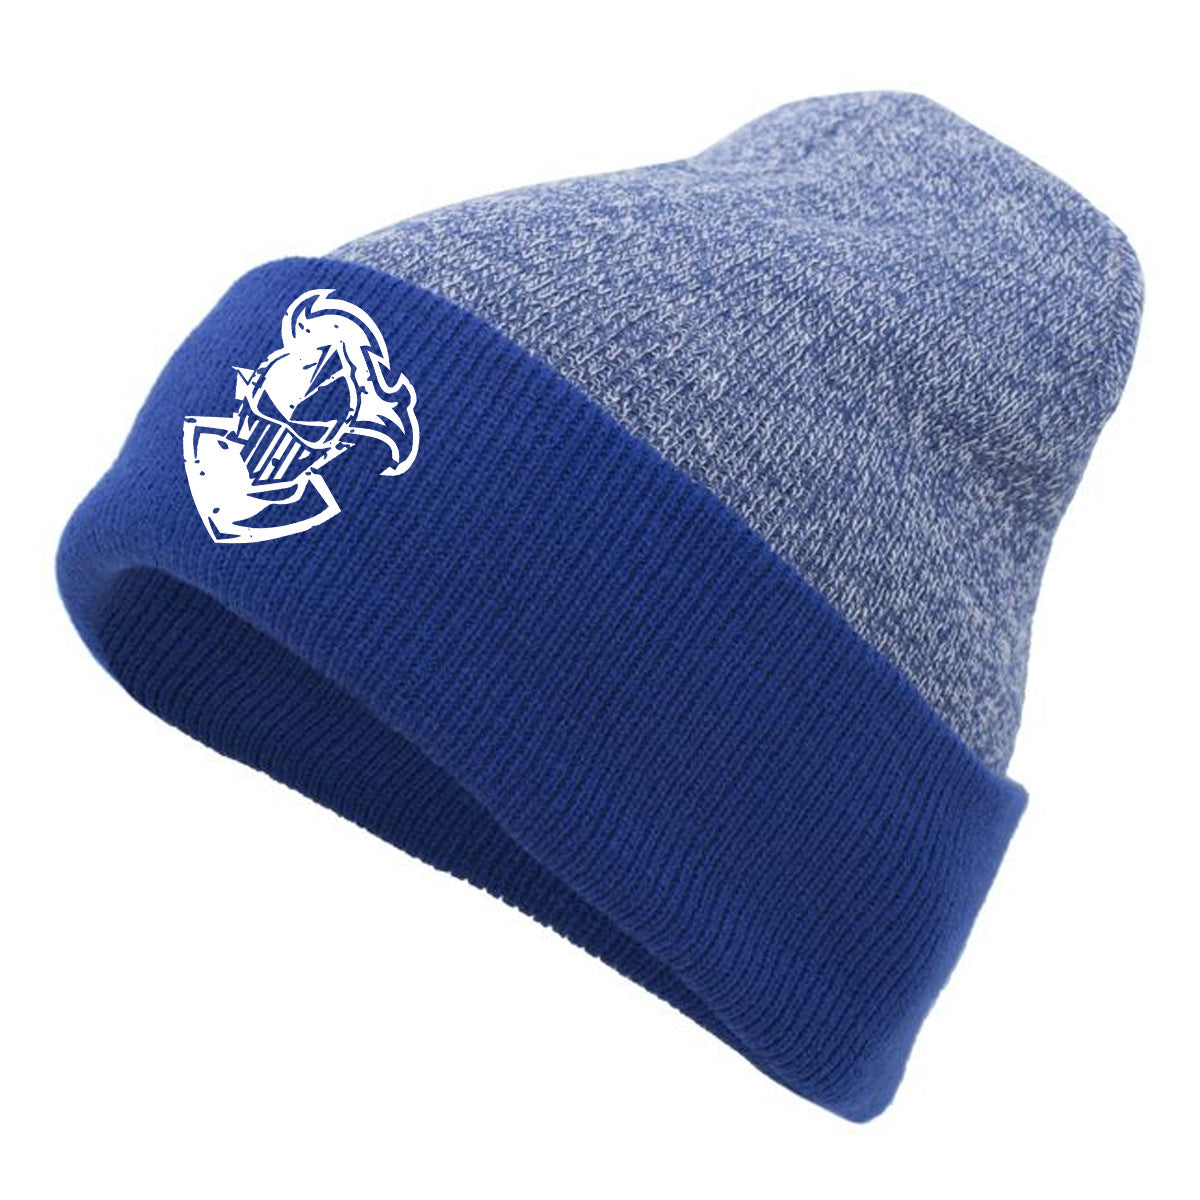 Windsor - Heather Two-Tone Cuff Beanie with Knight - Royal (651K) - Southern Grace Creations